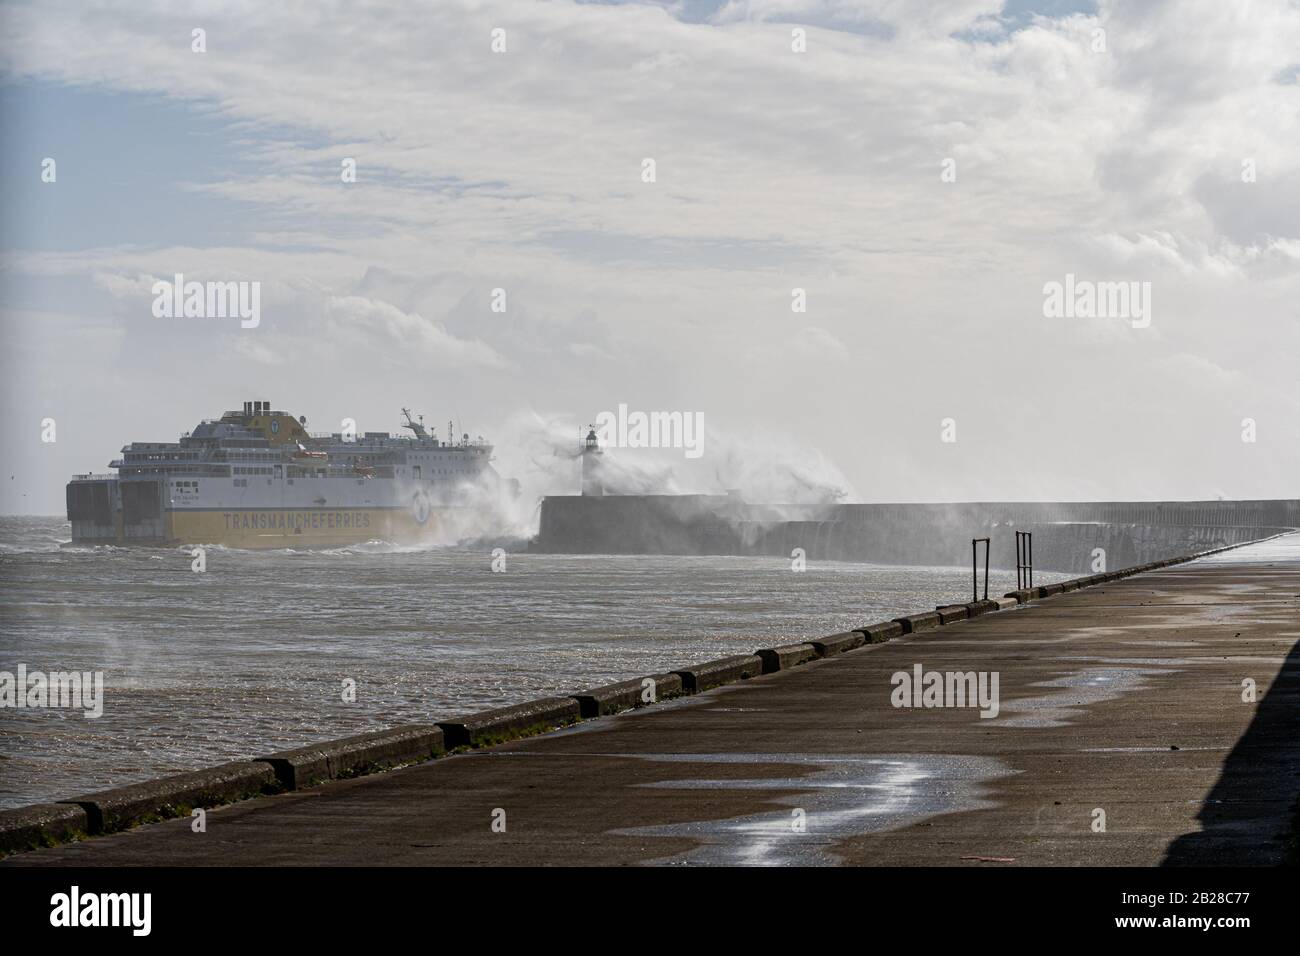 A ferry leaving Newhaven during Storm Jorge which brought gale force winds and heavy rain to England on 29th February 2020. Stock Photo